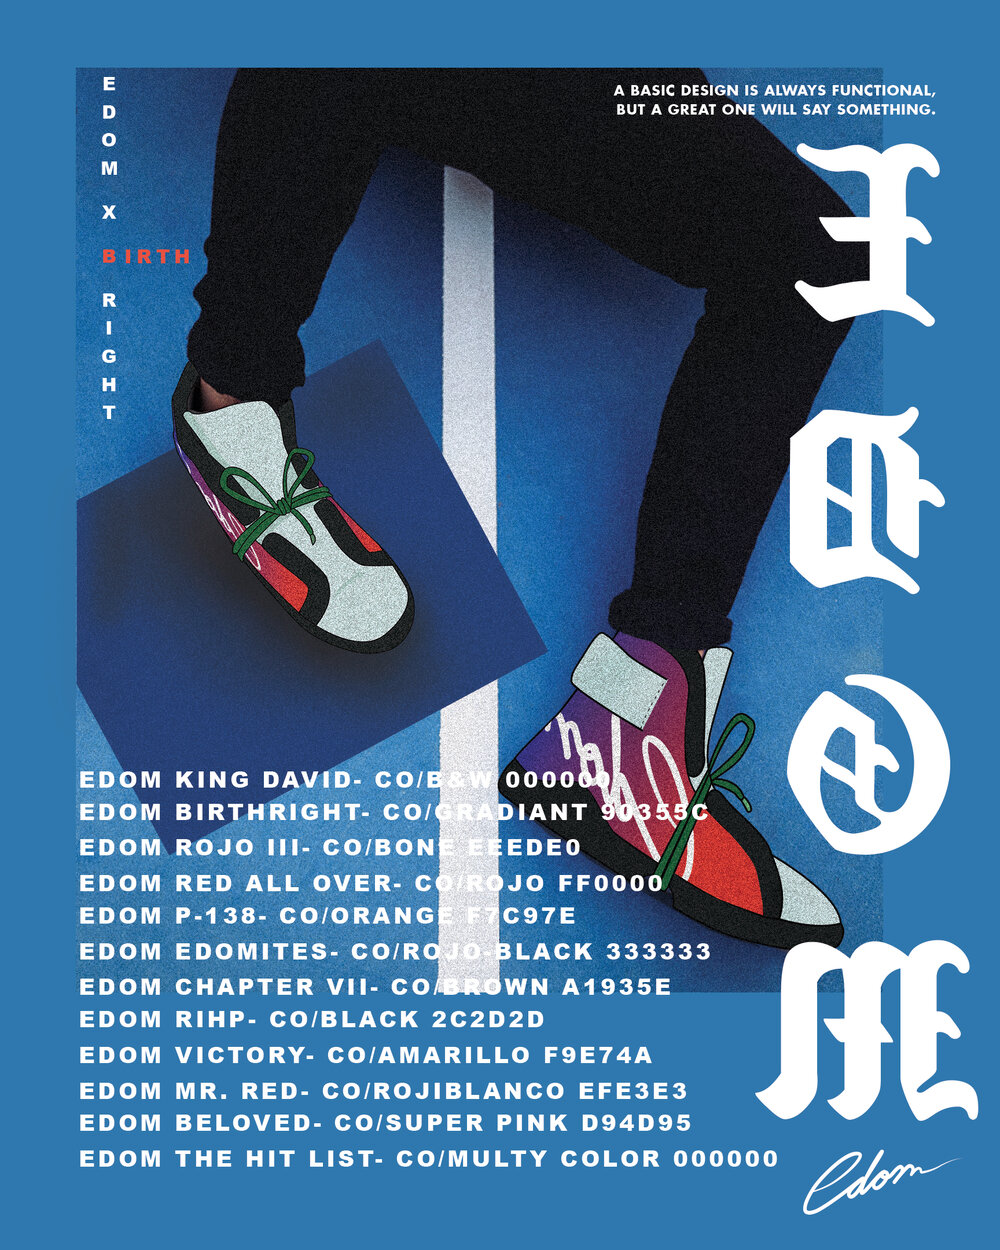 Edom Main Poster / 24” x 30” / List of shoe models available